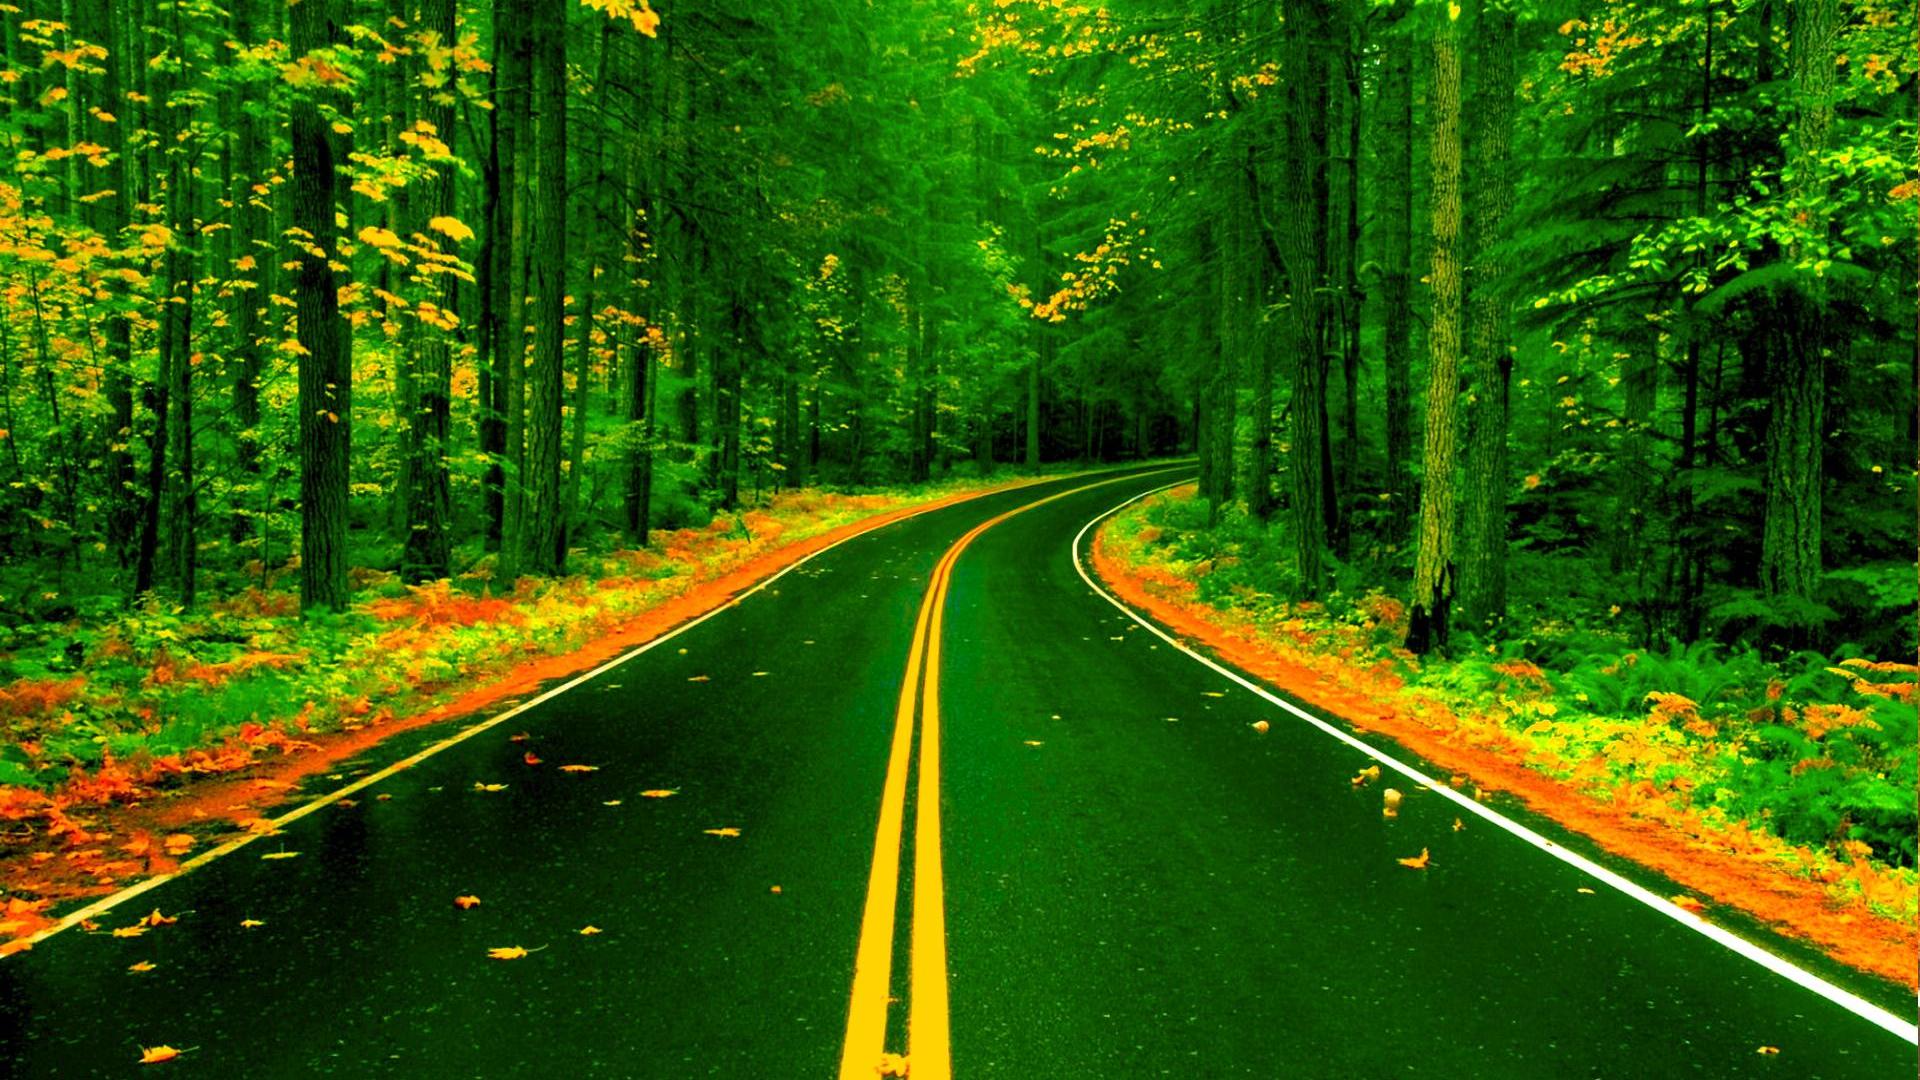 Nature Back Ground Hd Road - 1920x1080 Wallpaper 